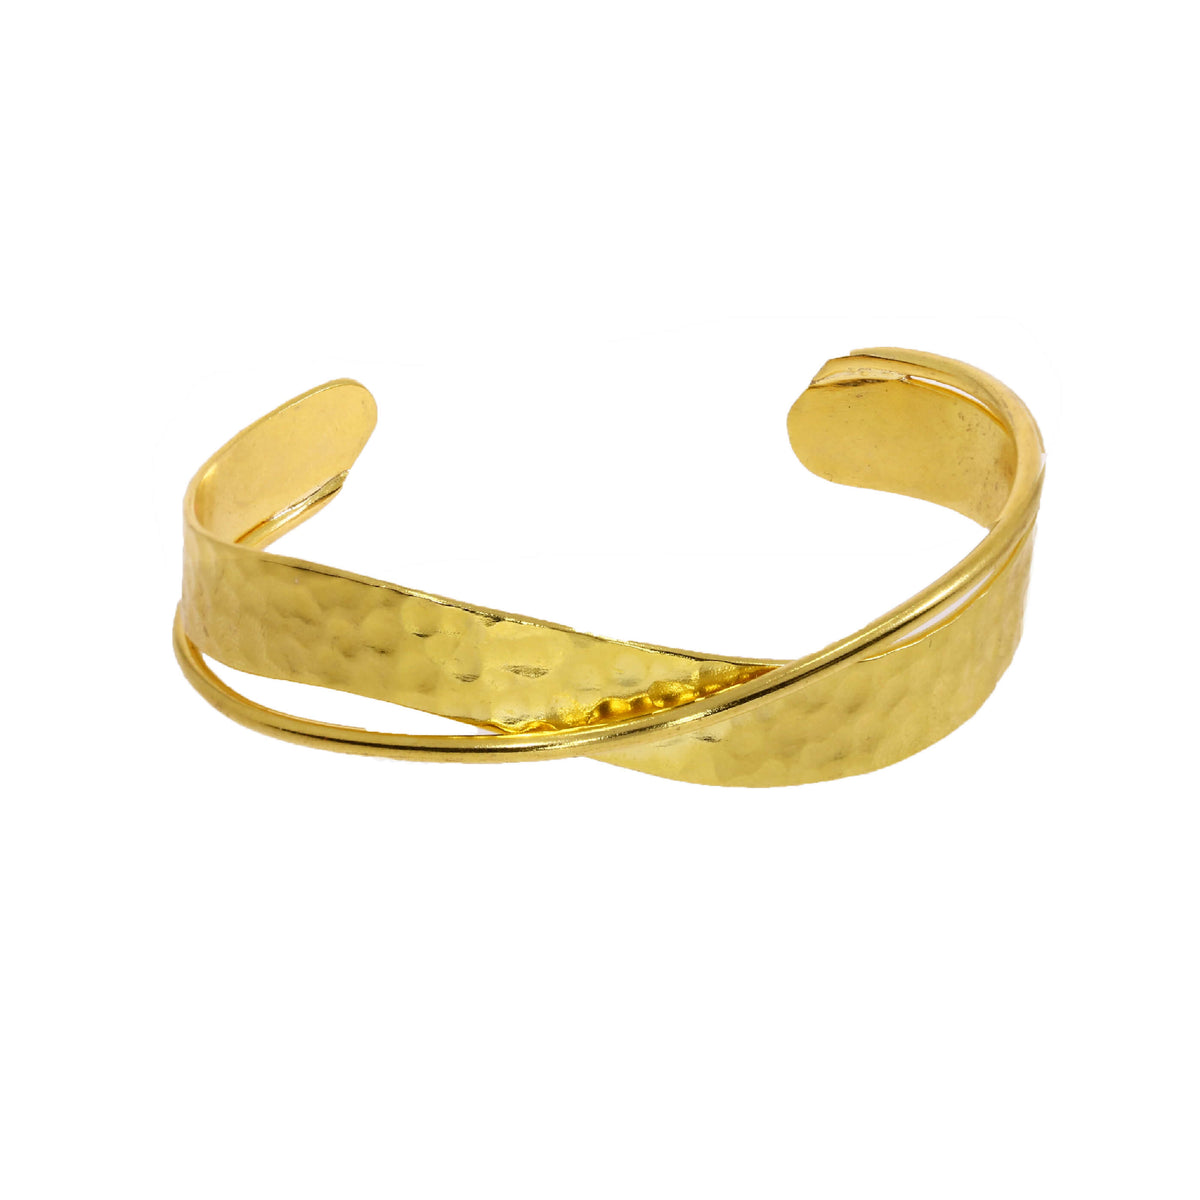 OTTOMAN Hammered gold double bangle